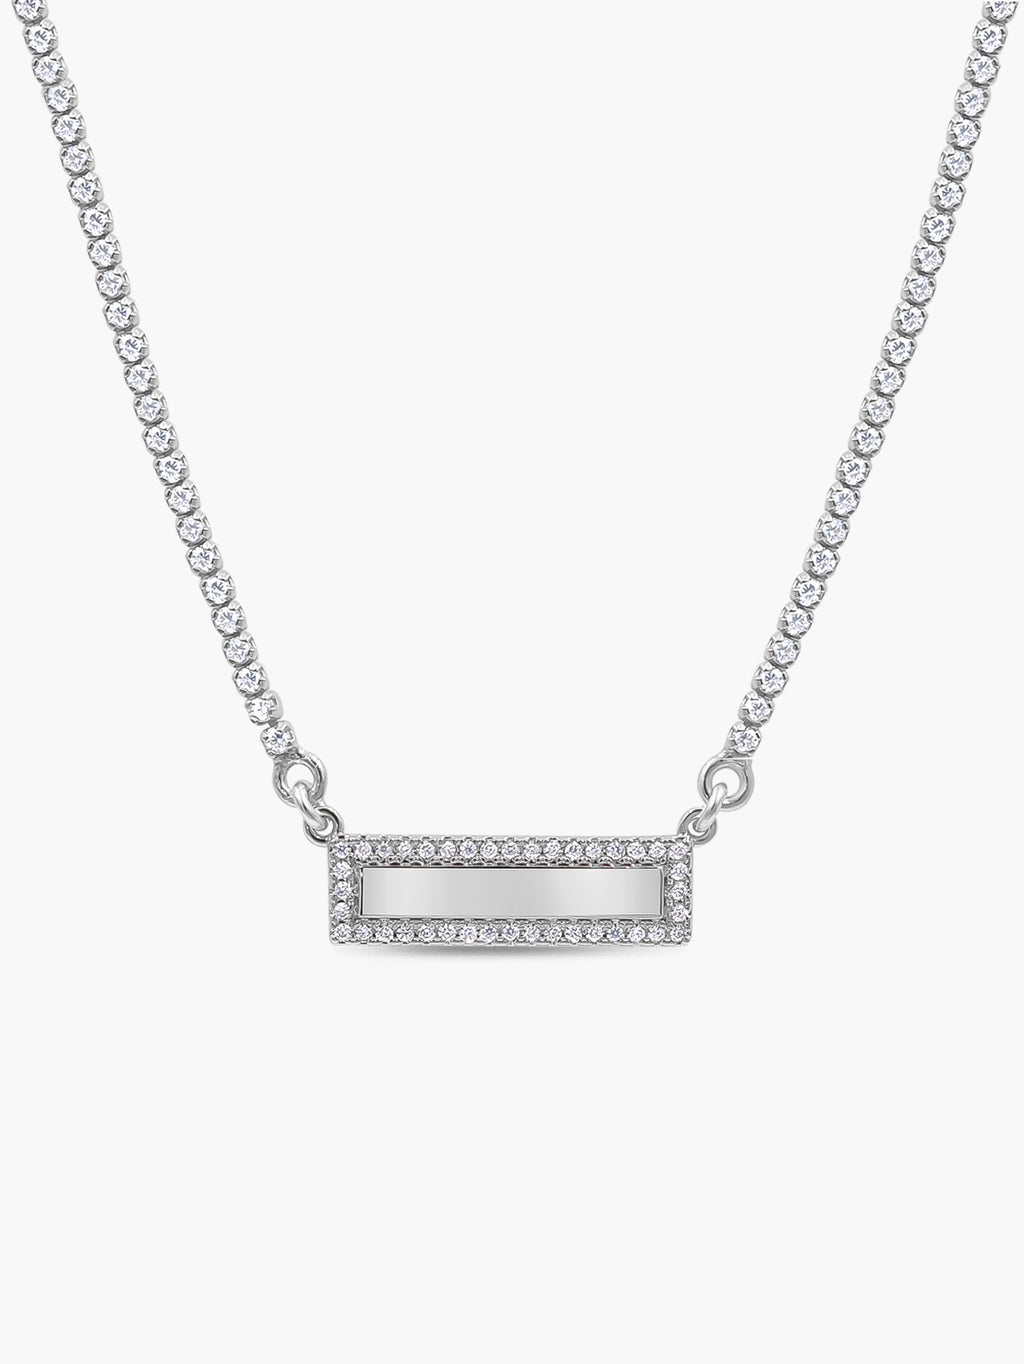 Tennis Necklace with Sparkle Bar